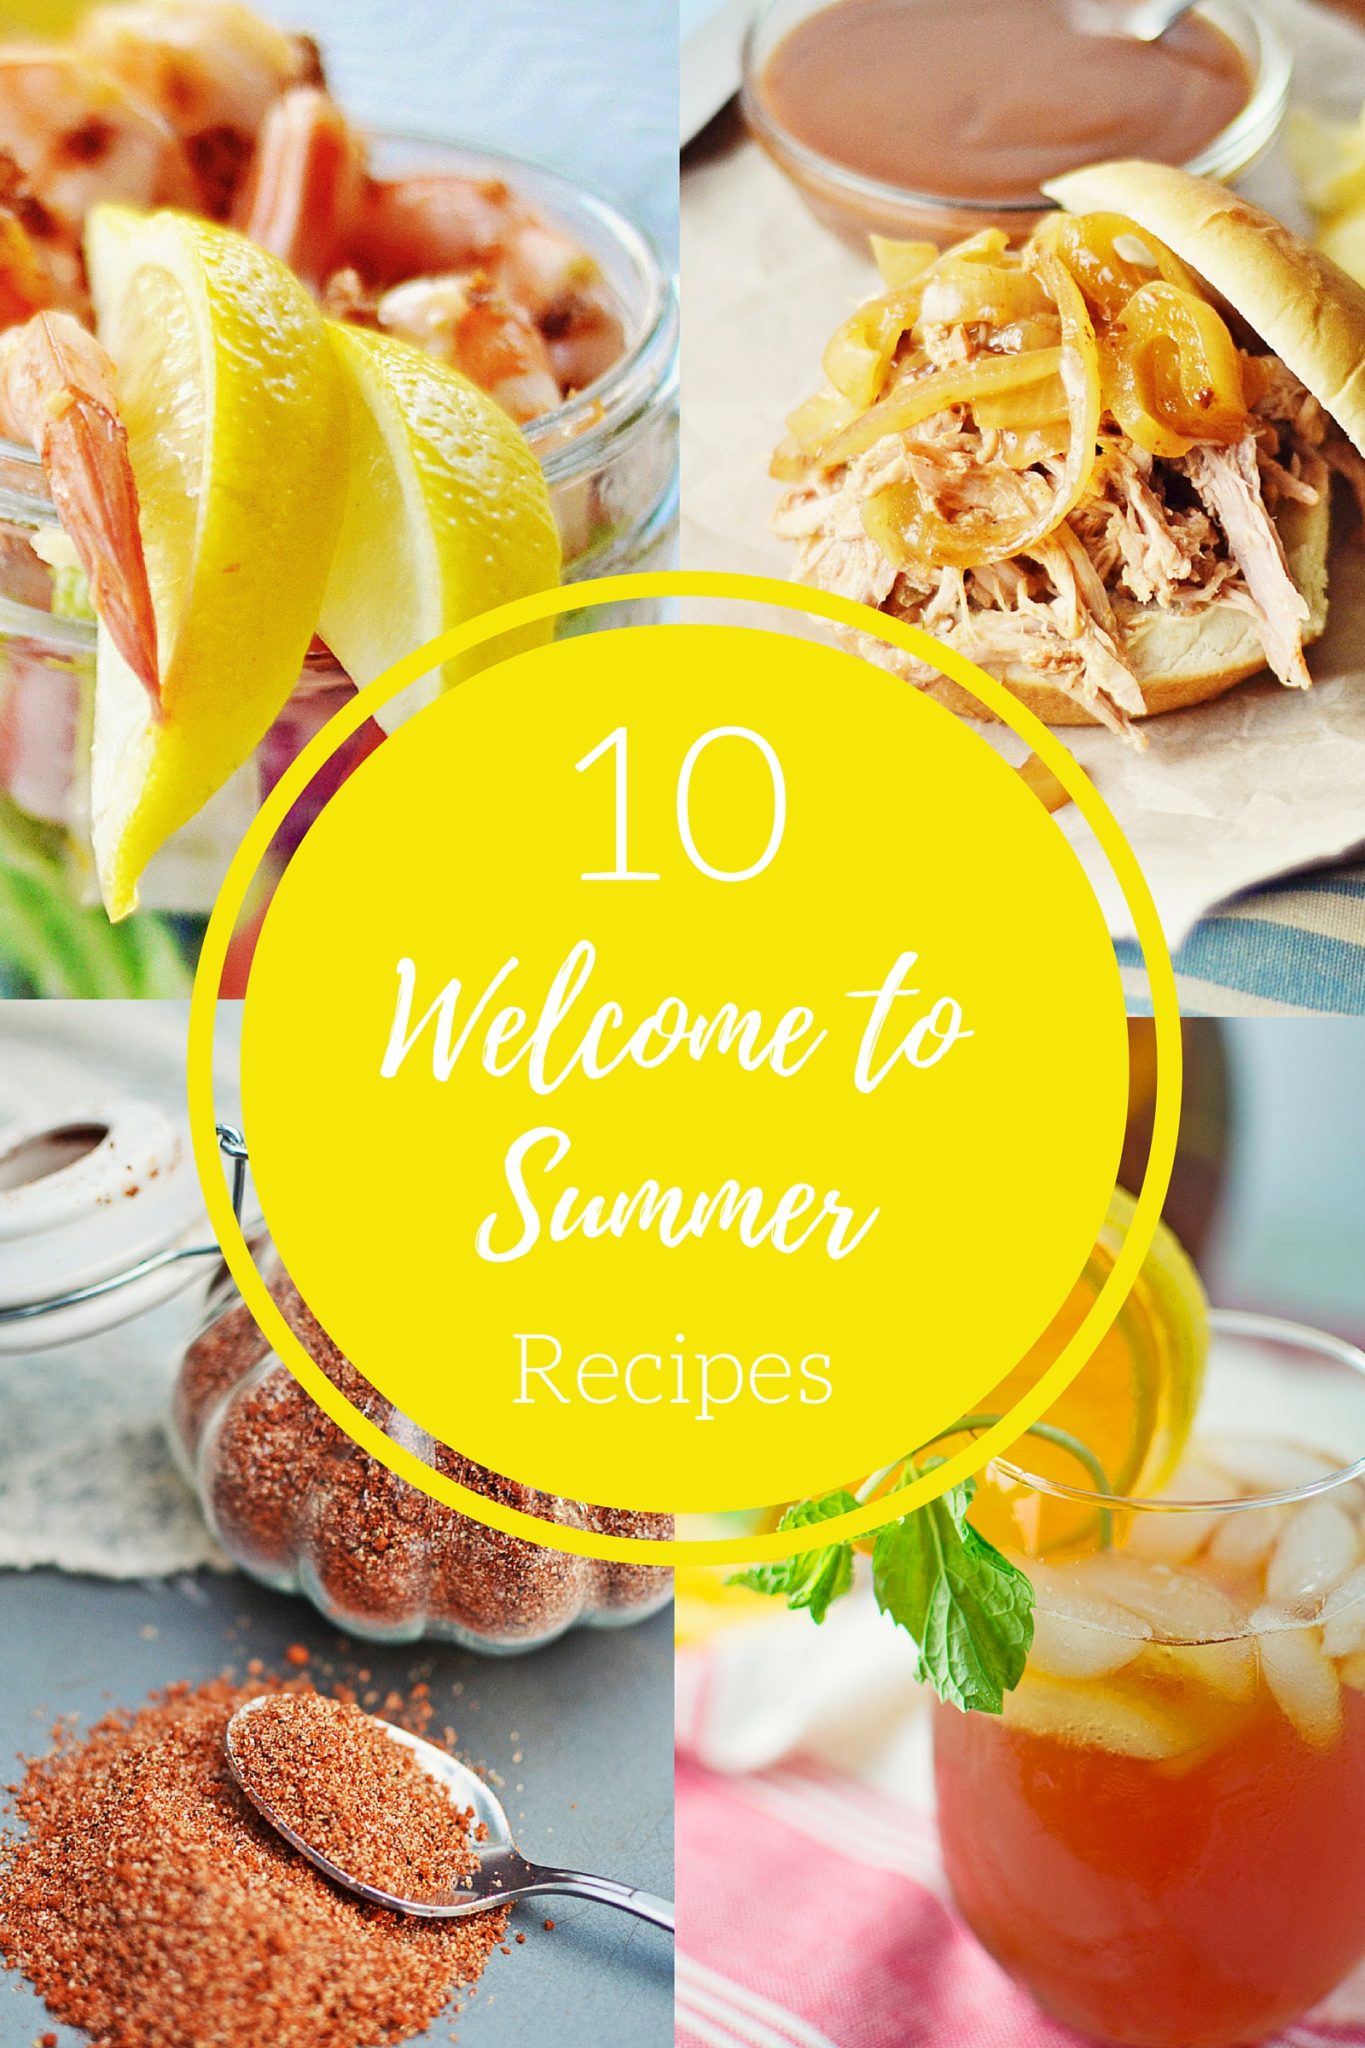 Try these oh so good Summer Recipes! A shortlist of 10 recipes that you'll want to try and enjoy. Recipes found @LittleFiggyFood